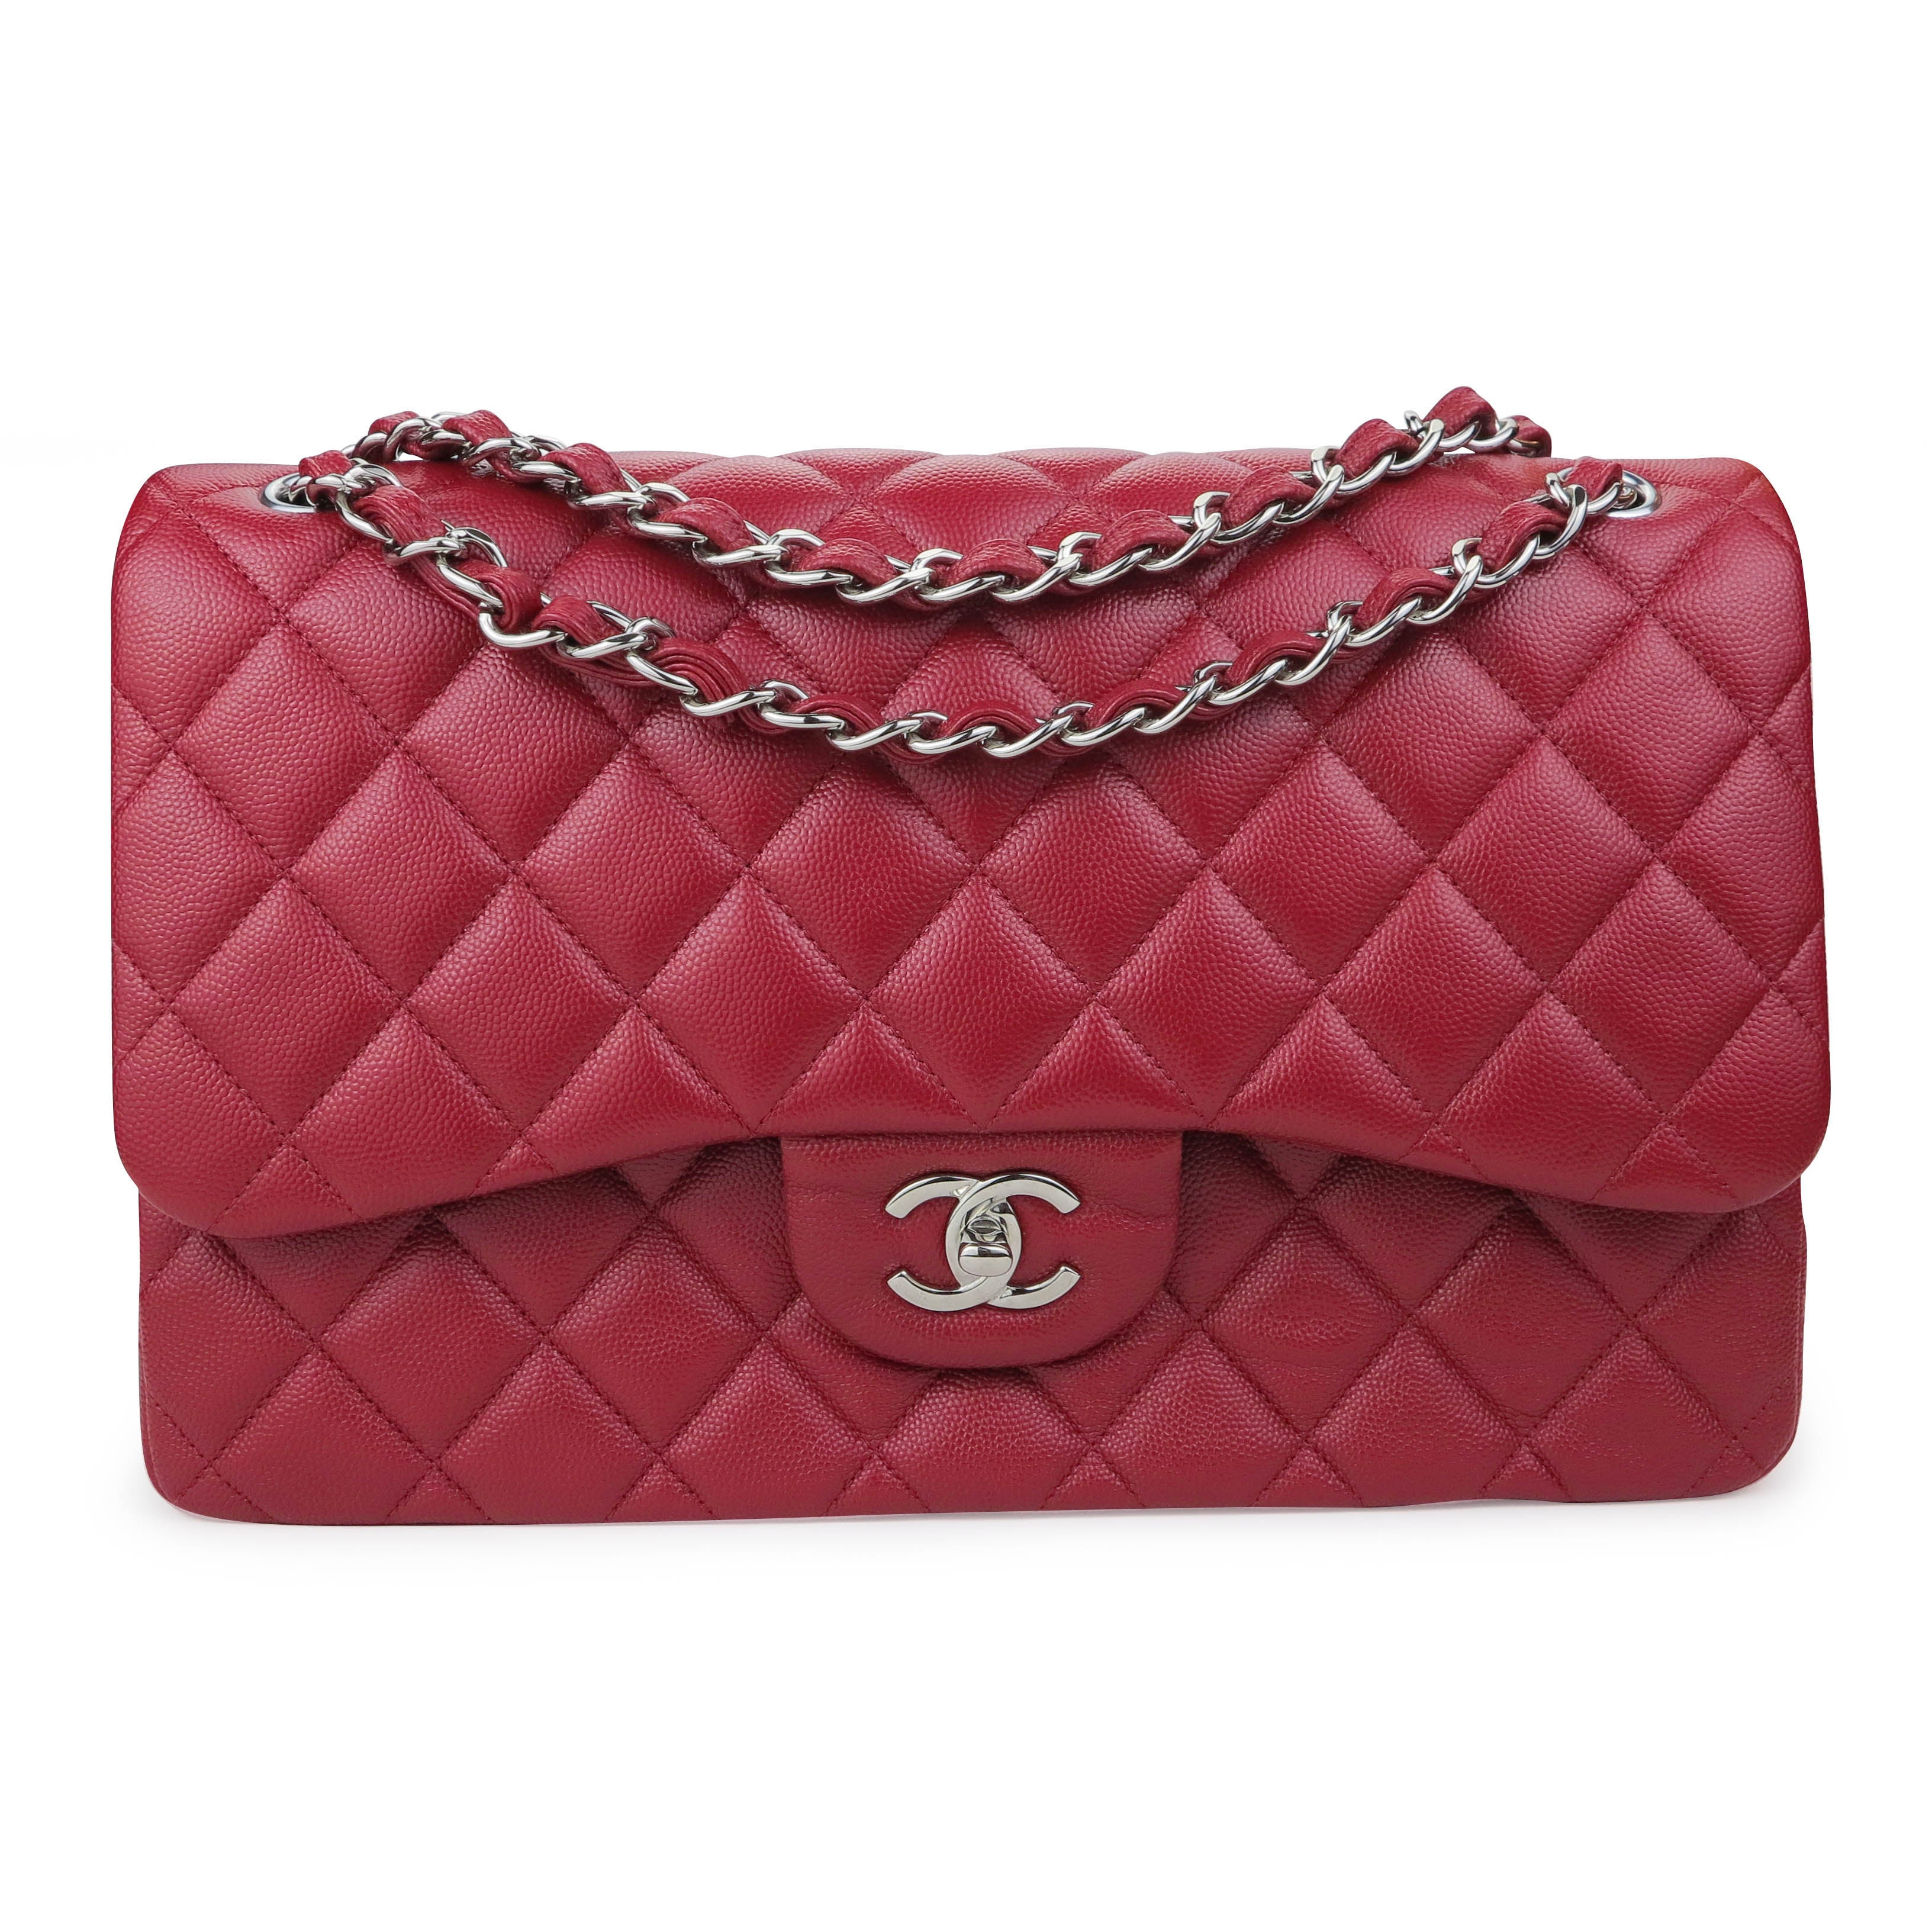 1990 Chanel Red Quilted Lambskin Vintage Mini Flap Bag at 1stDibs  vintage  chanel bags 1990, red vintage chanel bag, chanel red vintage bag